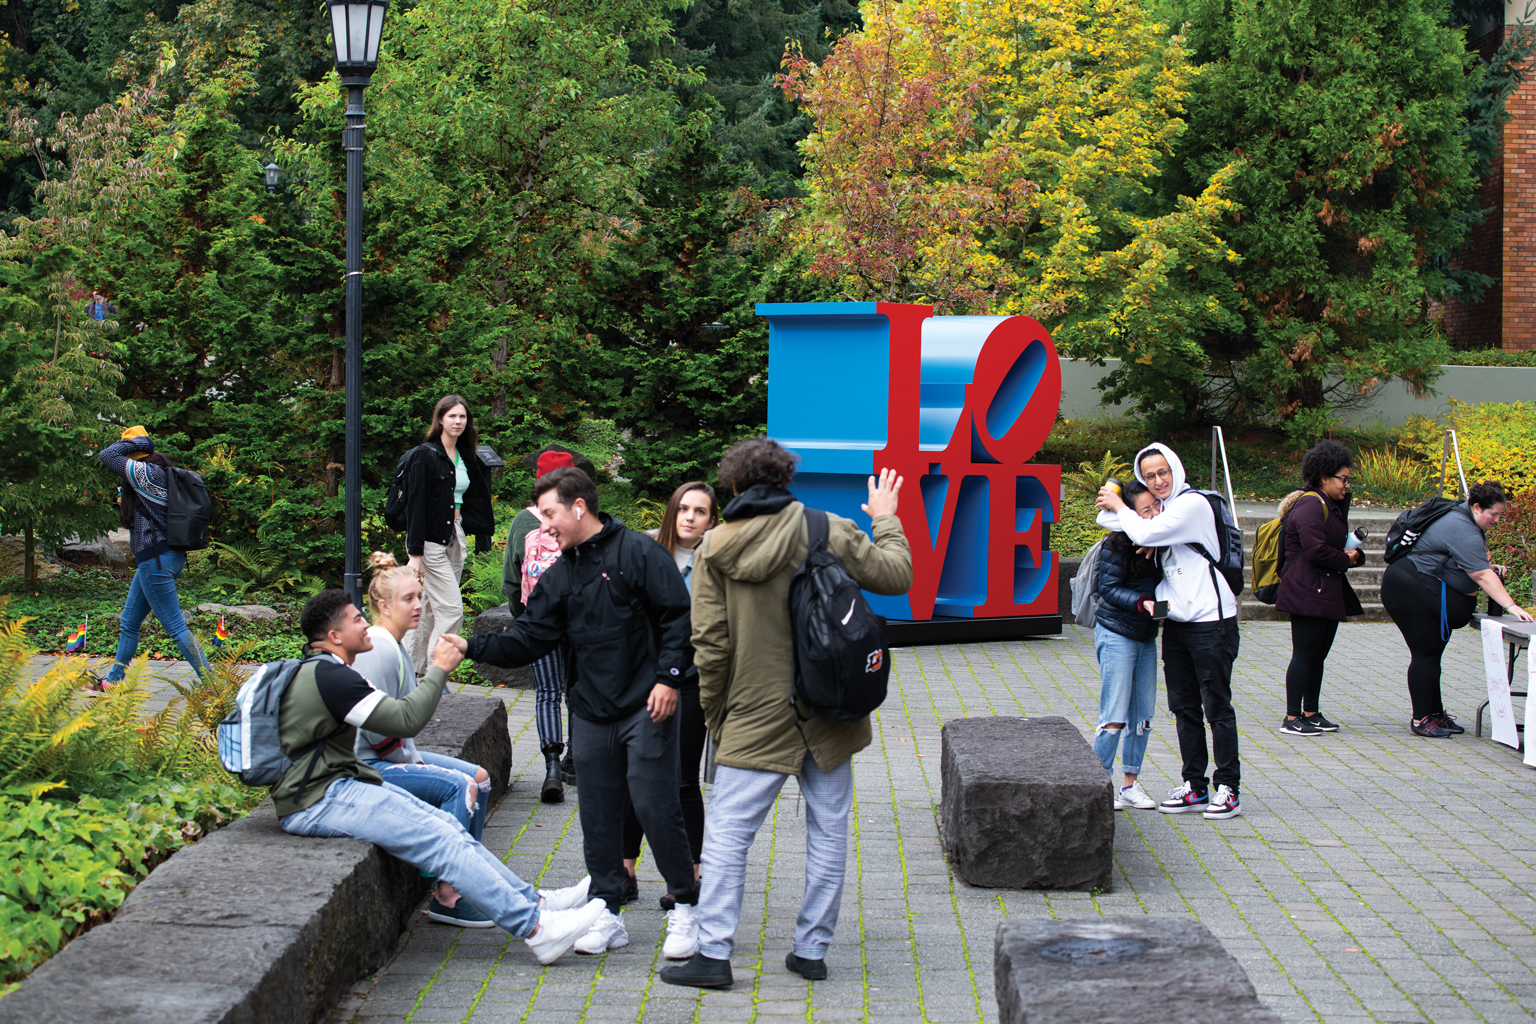 Students mingle outside J.R. Howard Hall, where Robert Indiana's iconic LOVE sculpture is on display through the fall.